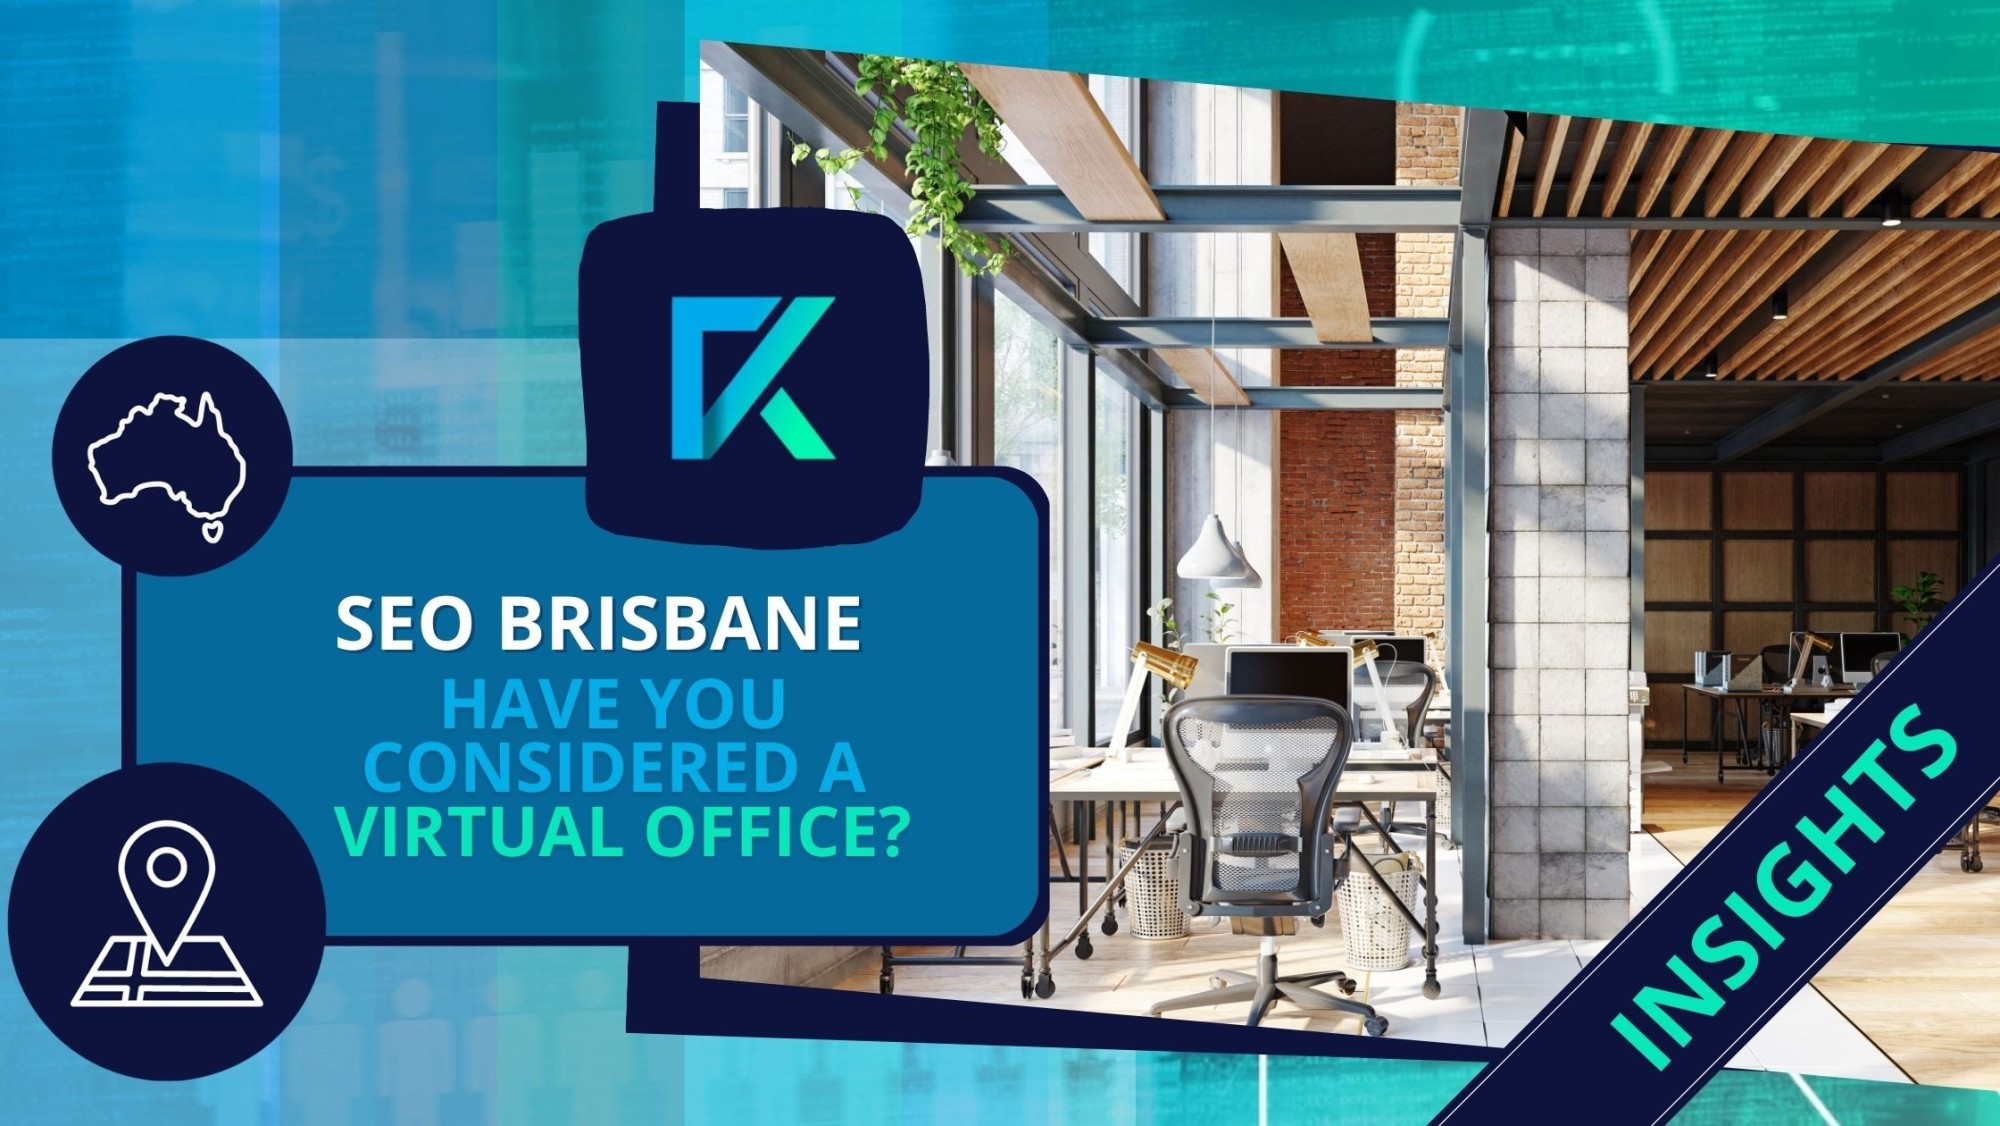 SEO Brisbane Ranking can be improved with a Virtual Office